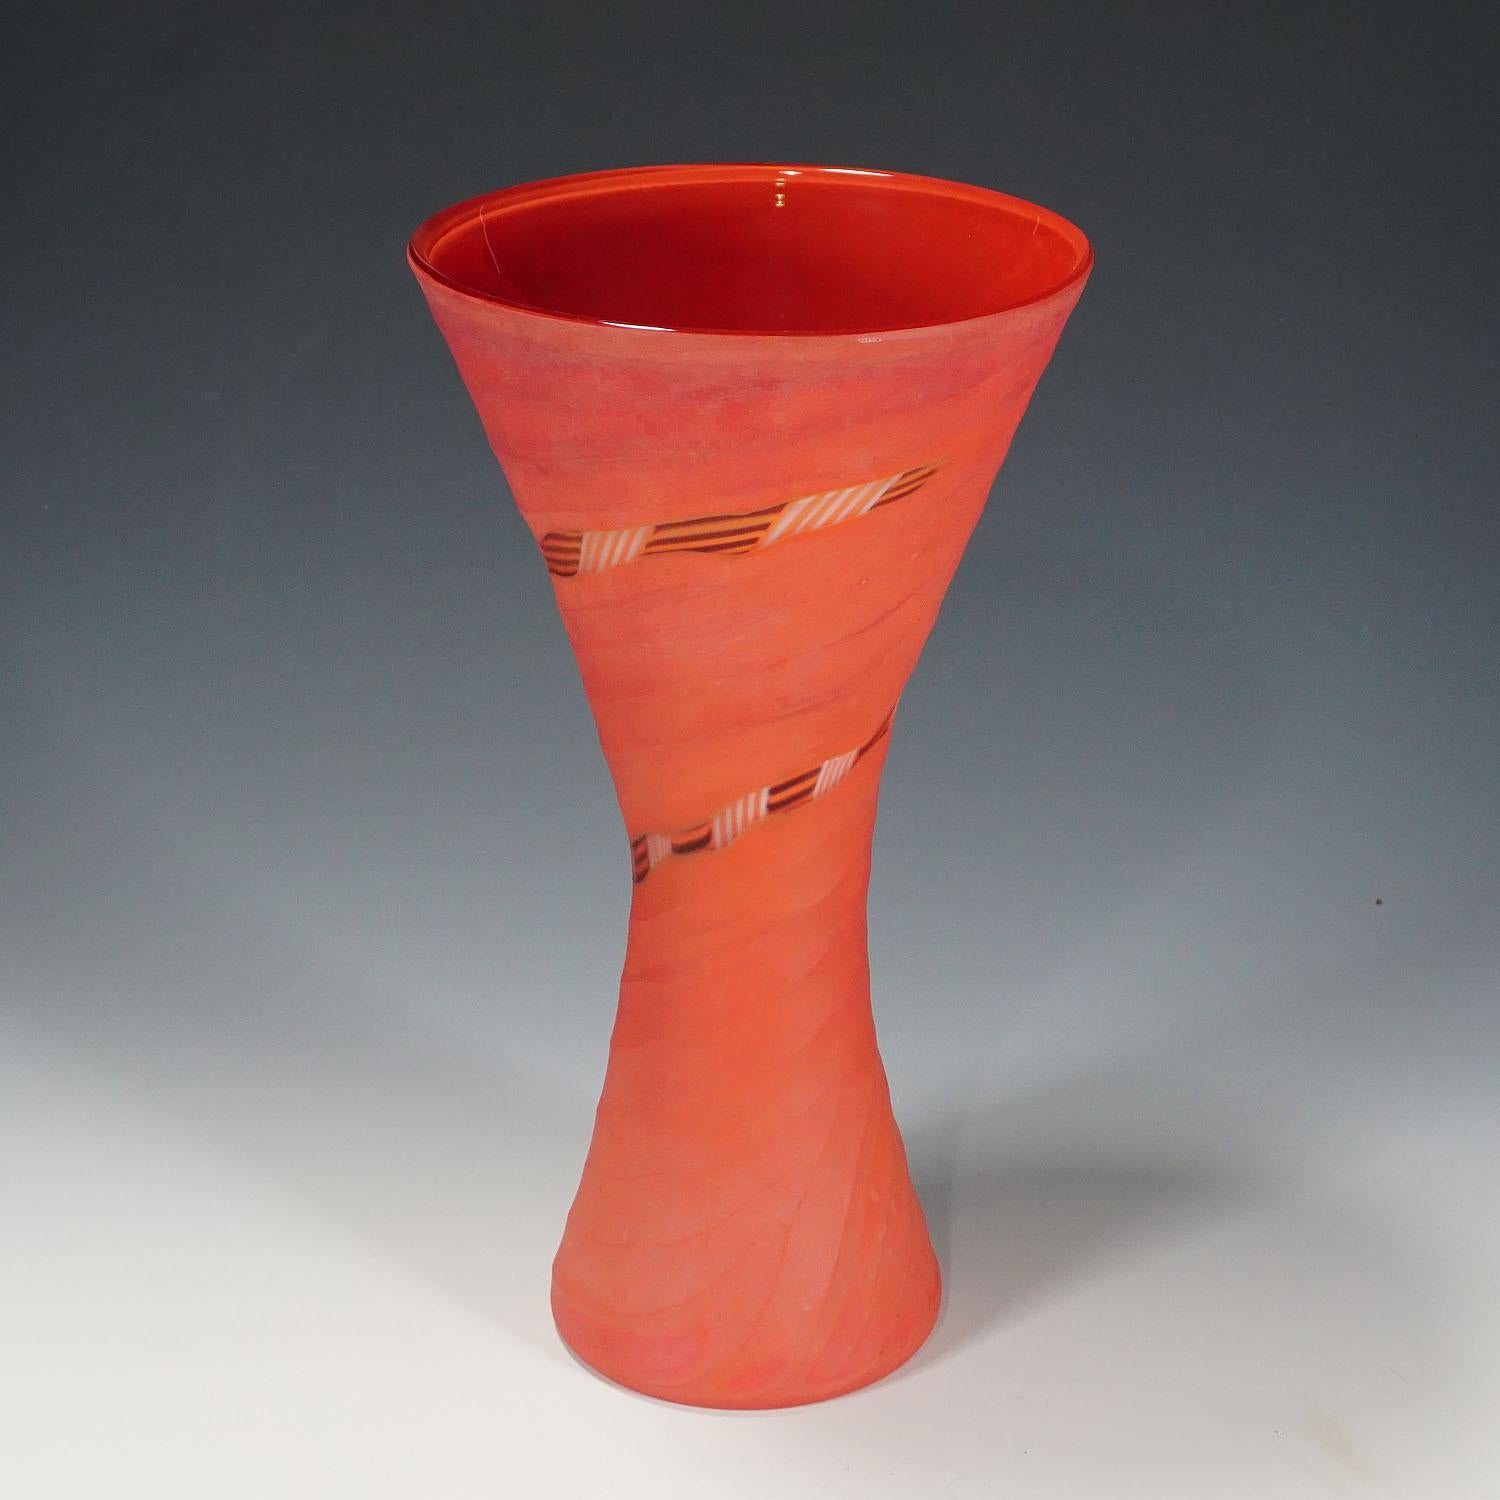 A vase of the Manto series designed by Rodolfo Dordoni for Venini. Fused coral-red, clear and black glass, surface with matte grinded finish. Venini, Murano 2001. With Venini lable and incised signature on the base.

Measurtes: Height 13.58